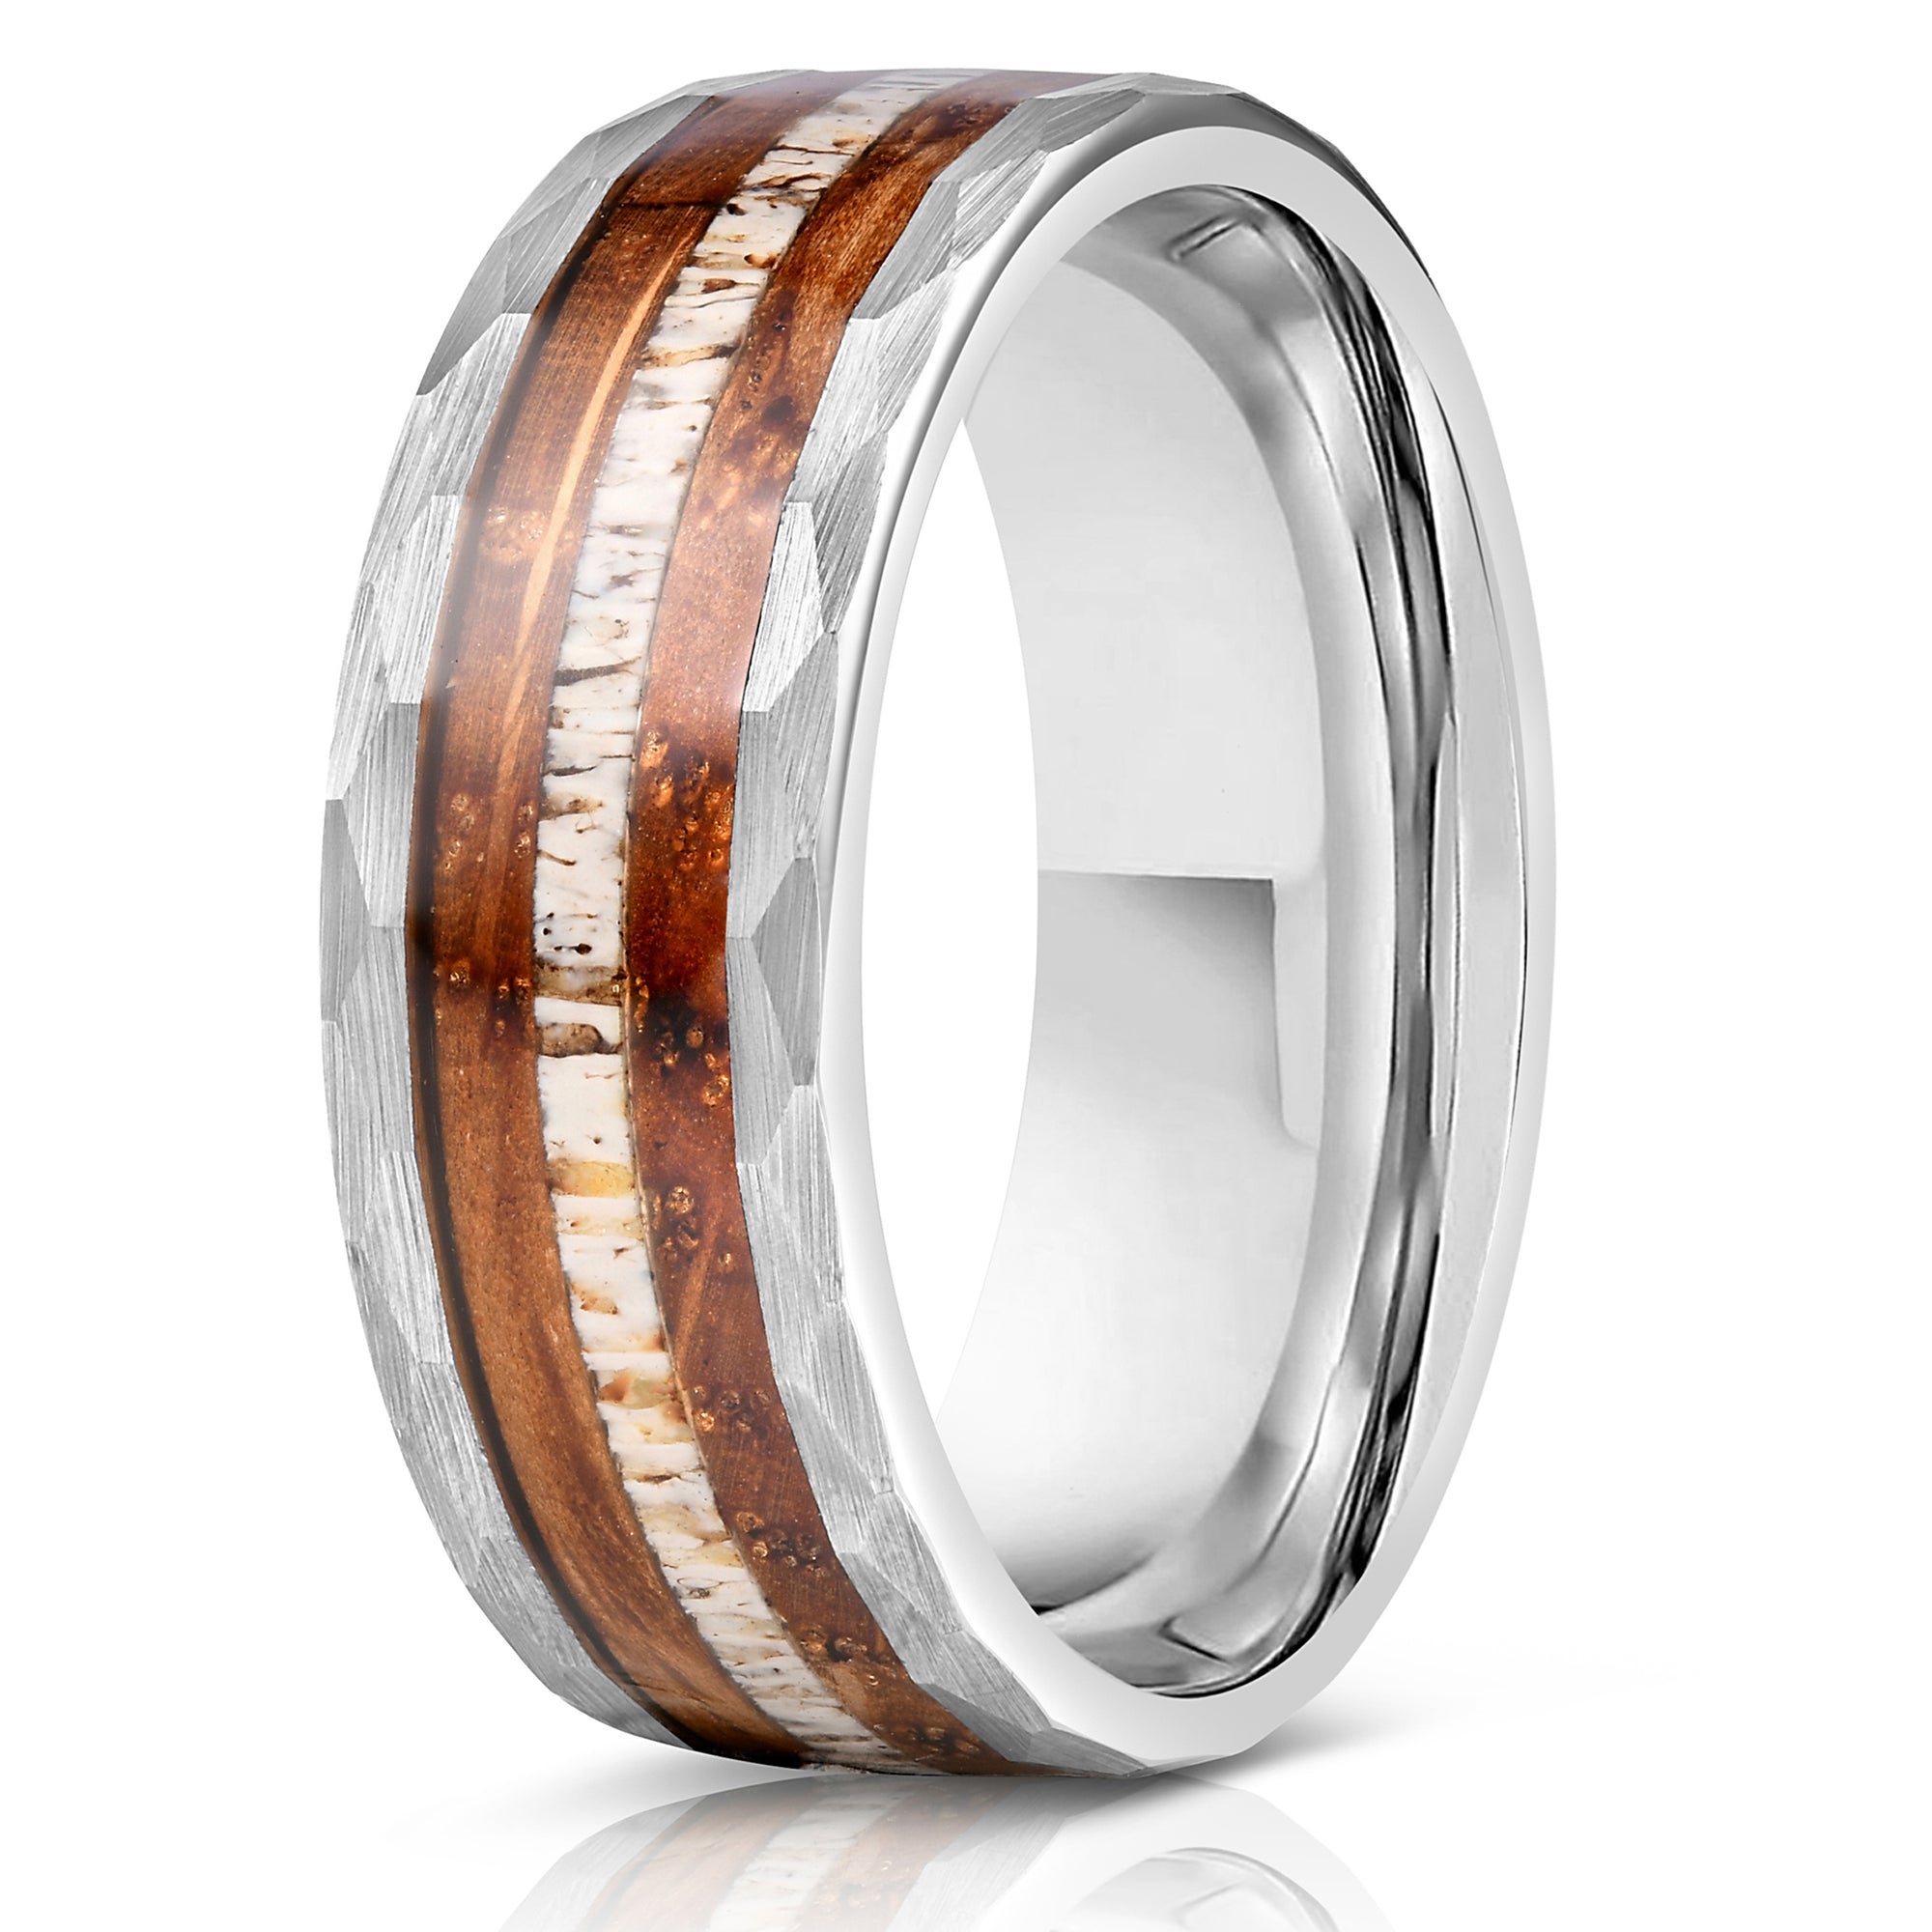 Cool Polished Black Tungsten Low Dome Ring with Gorgeous Gold Real Fishing Line Between Whiskey Barrel Oak Wood and Deer Antler Inlays.